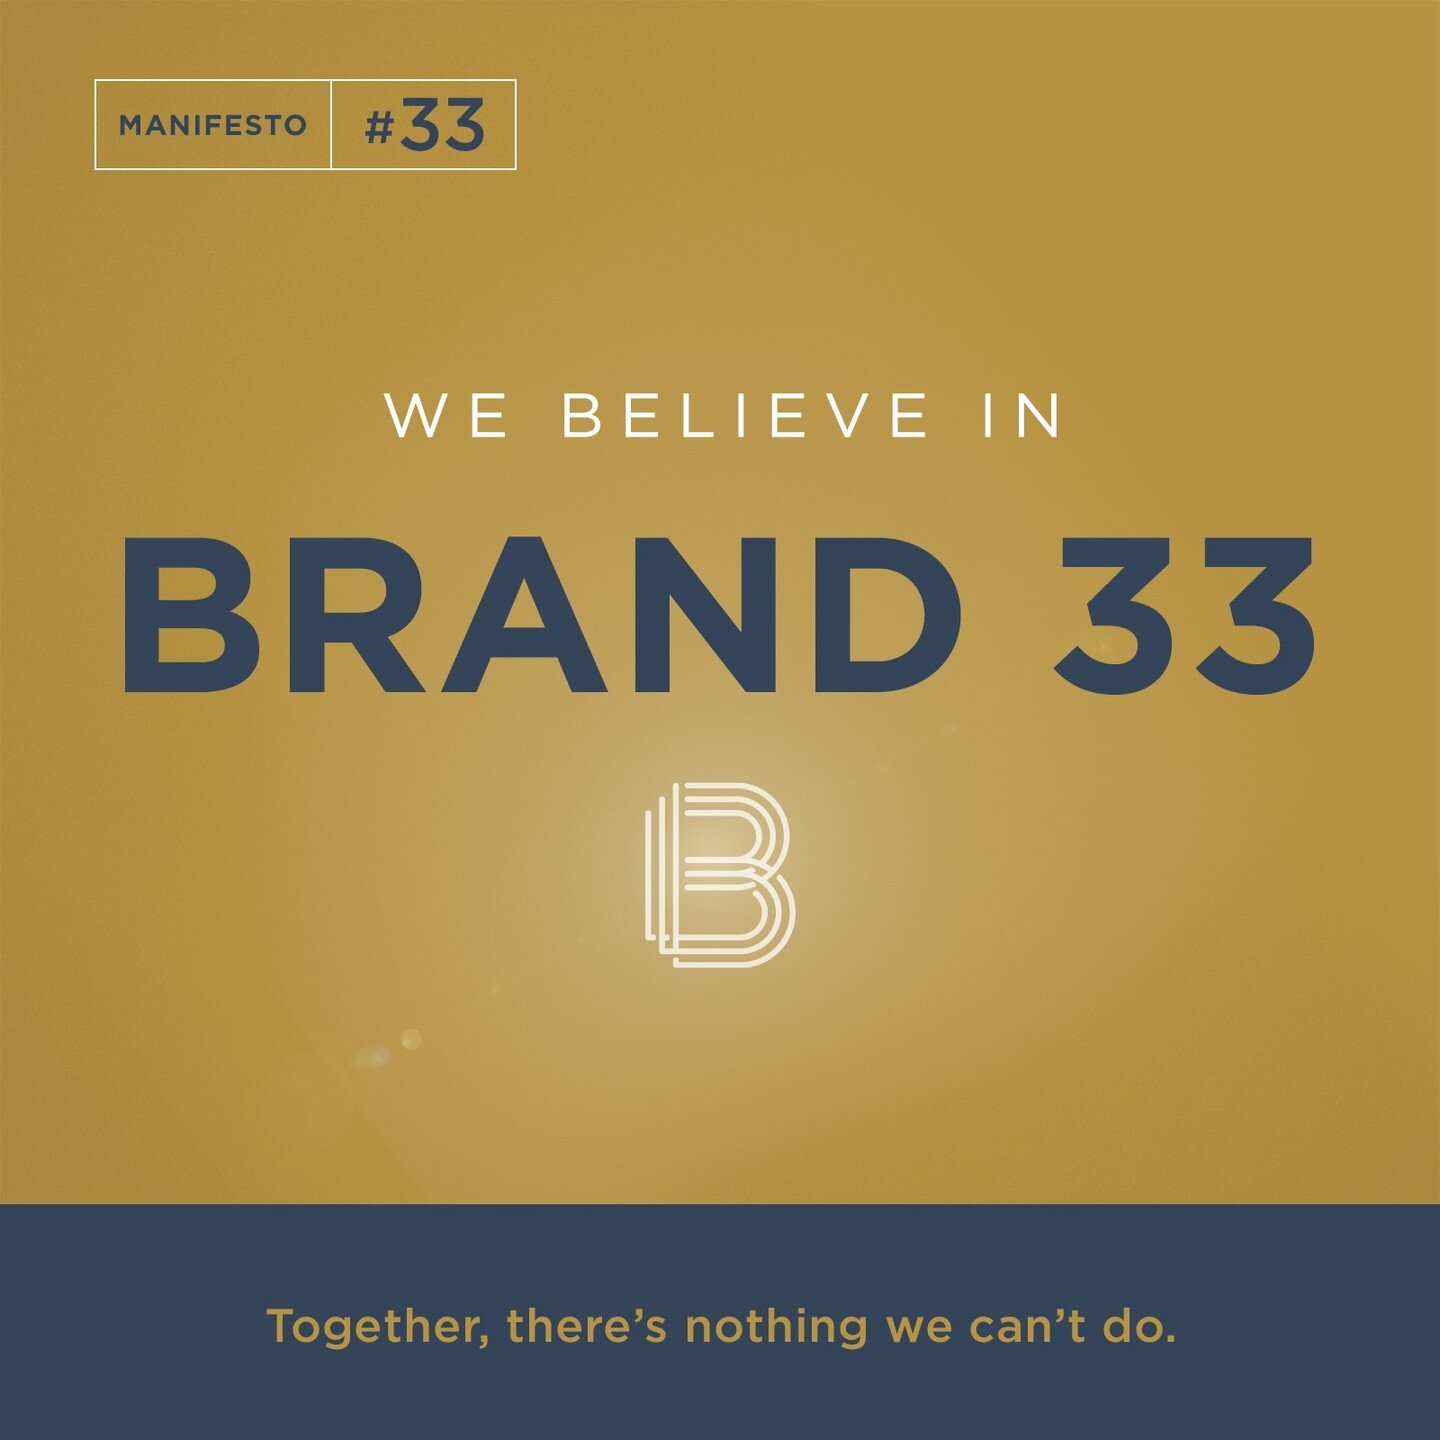 Manifesto #33 

We believe in Brand33. 

Together, there&rsquo;s nothing we can&rsquo;t do. 

   

#WeBelieve #Brand33 #B33Manifesto #Brand #Marketing